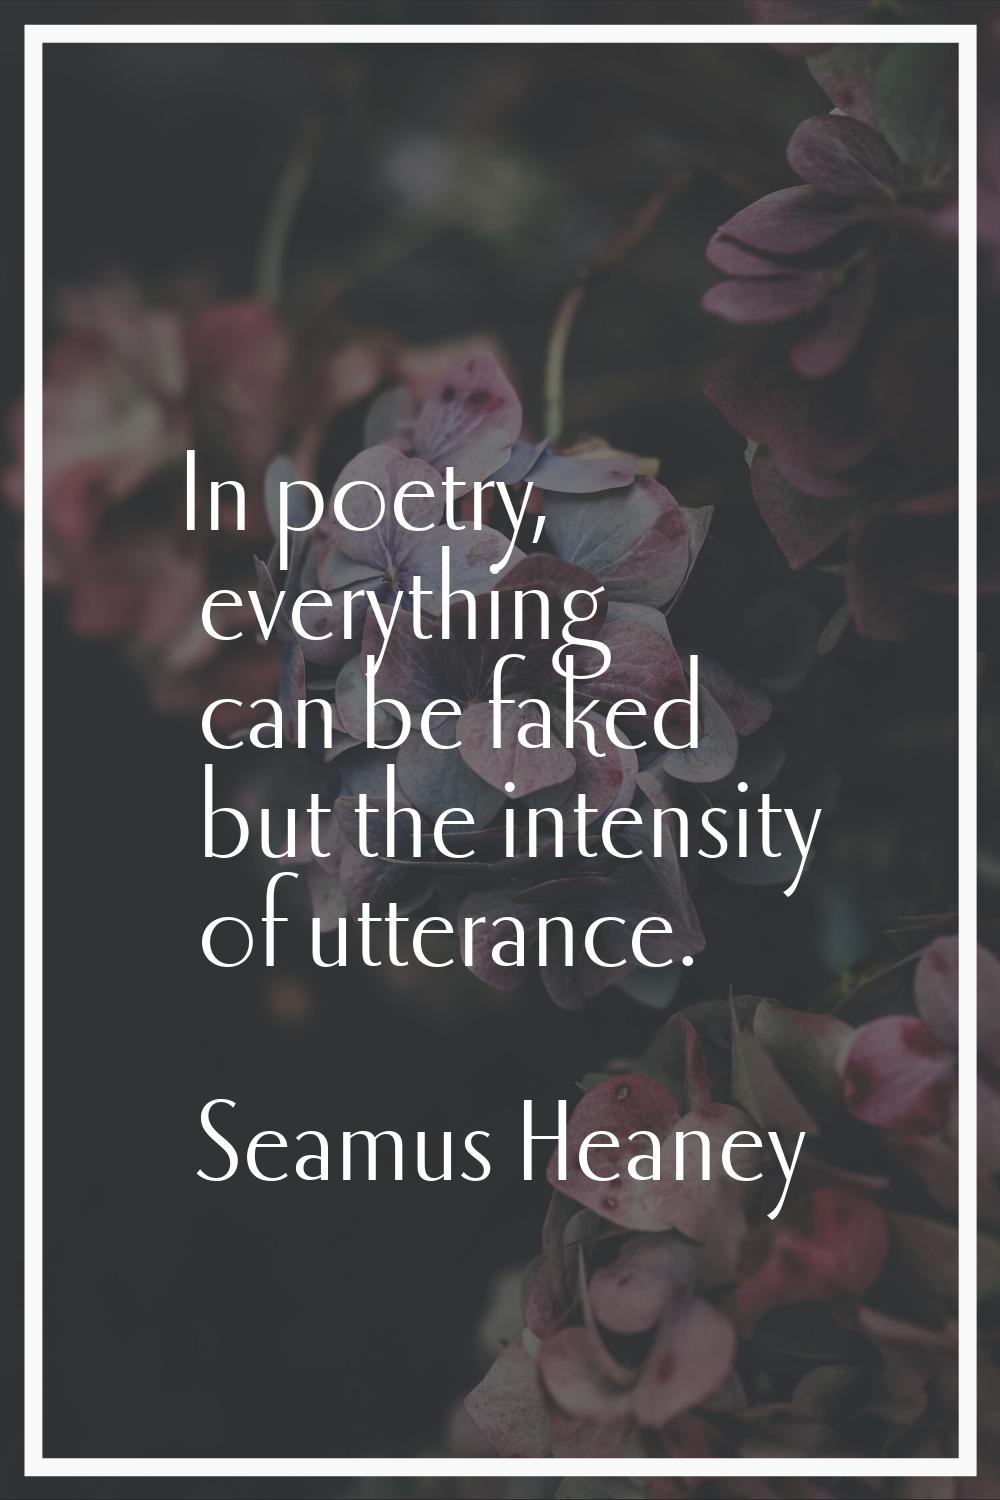 In poetry, everything can be faked but the intensity of utterance.